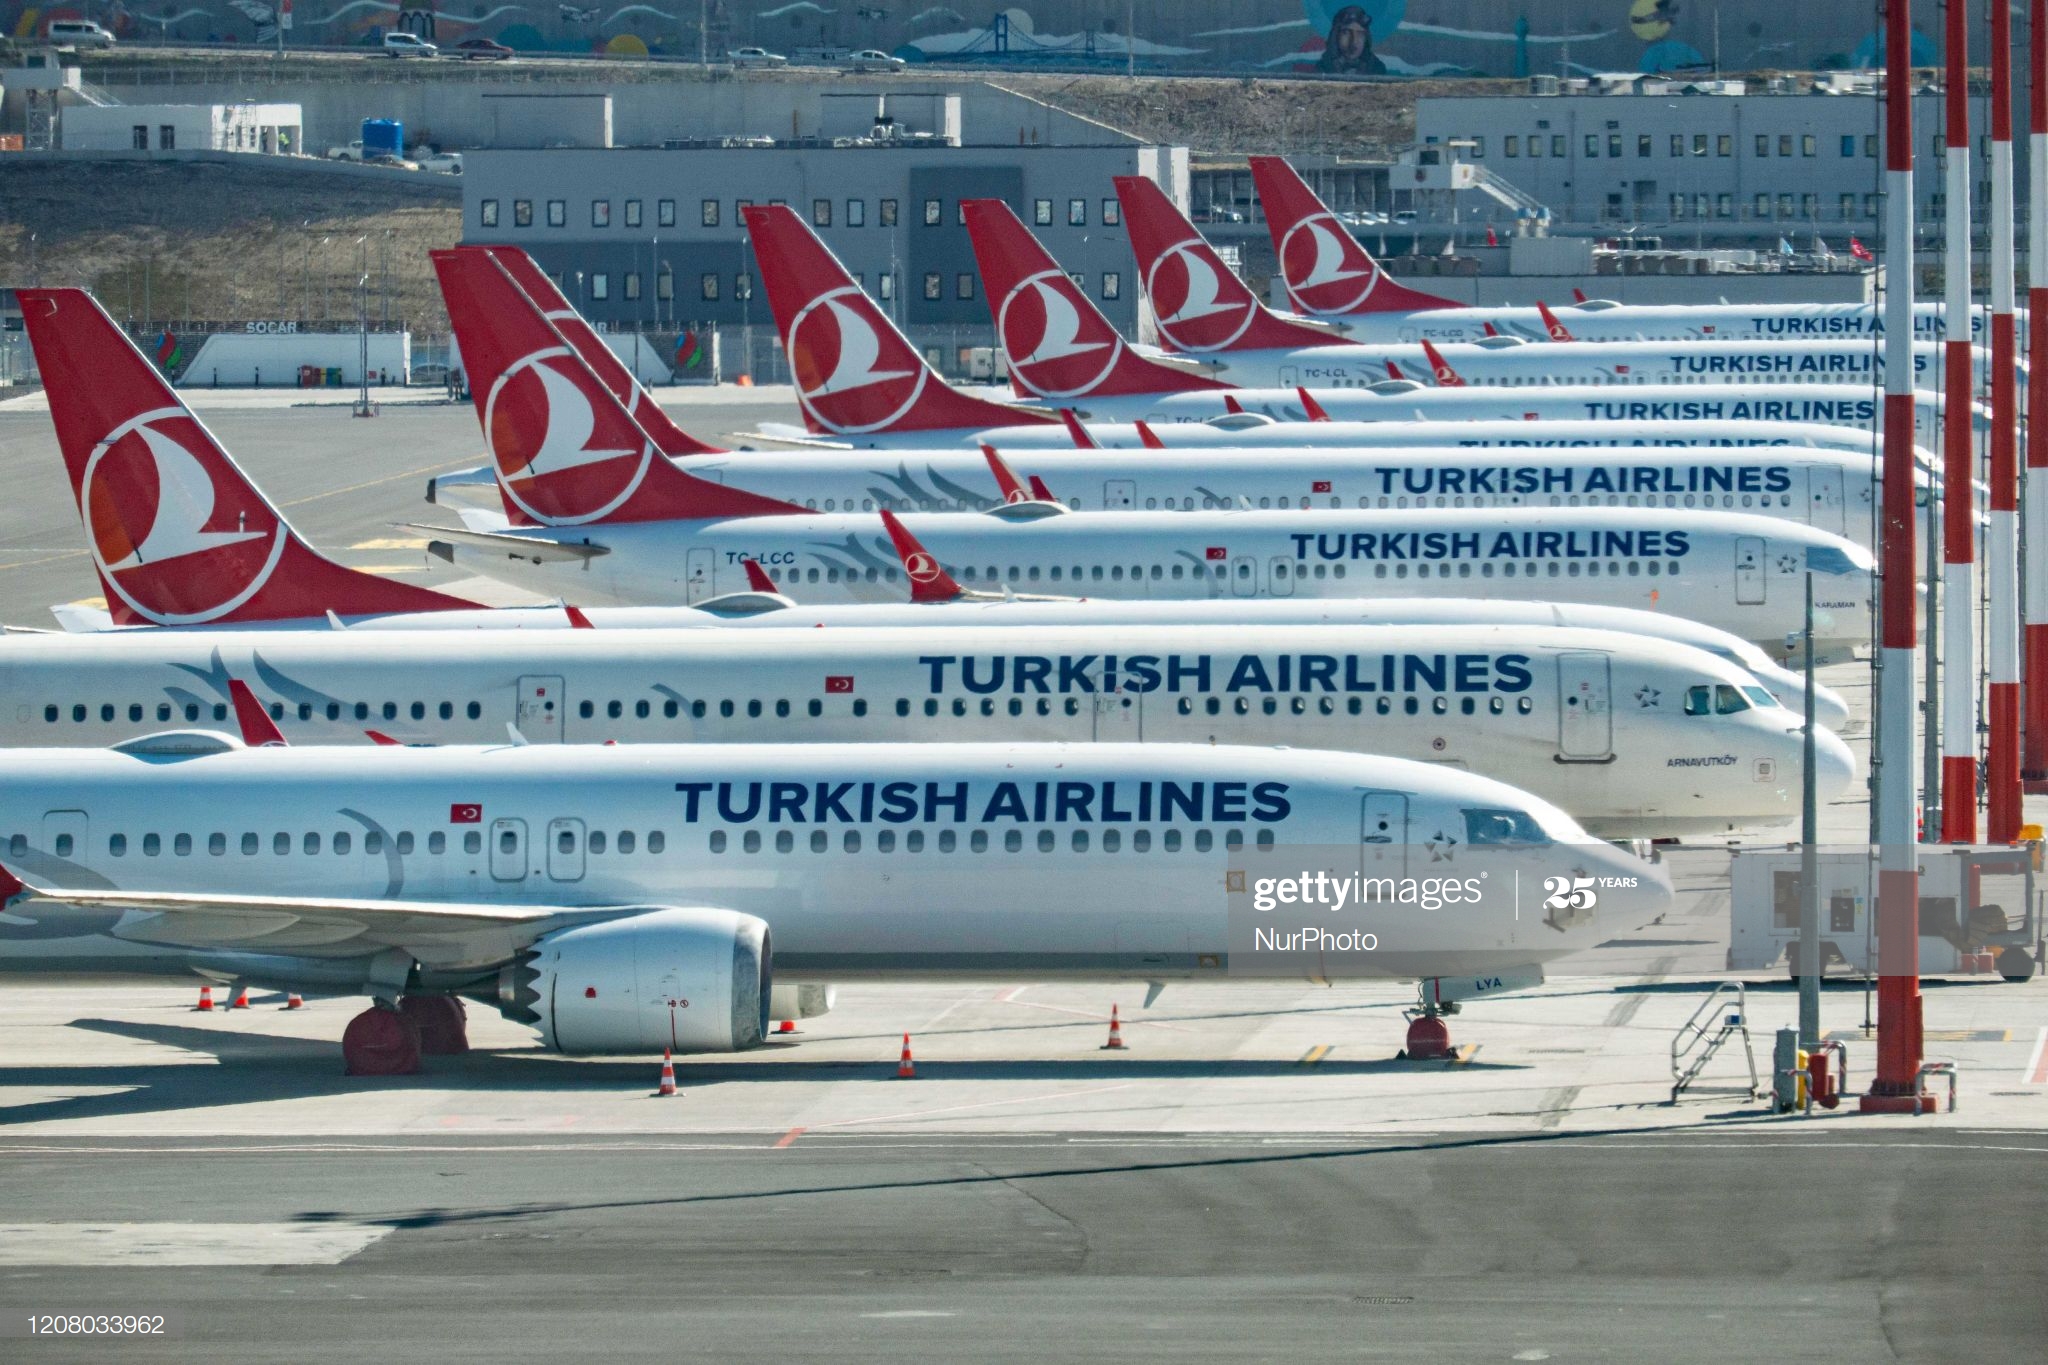 grounded-fleet-of-turkish-airlines-tk-airplanes-sit-on-the-tarmac-at-picture-id1208033962